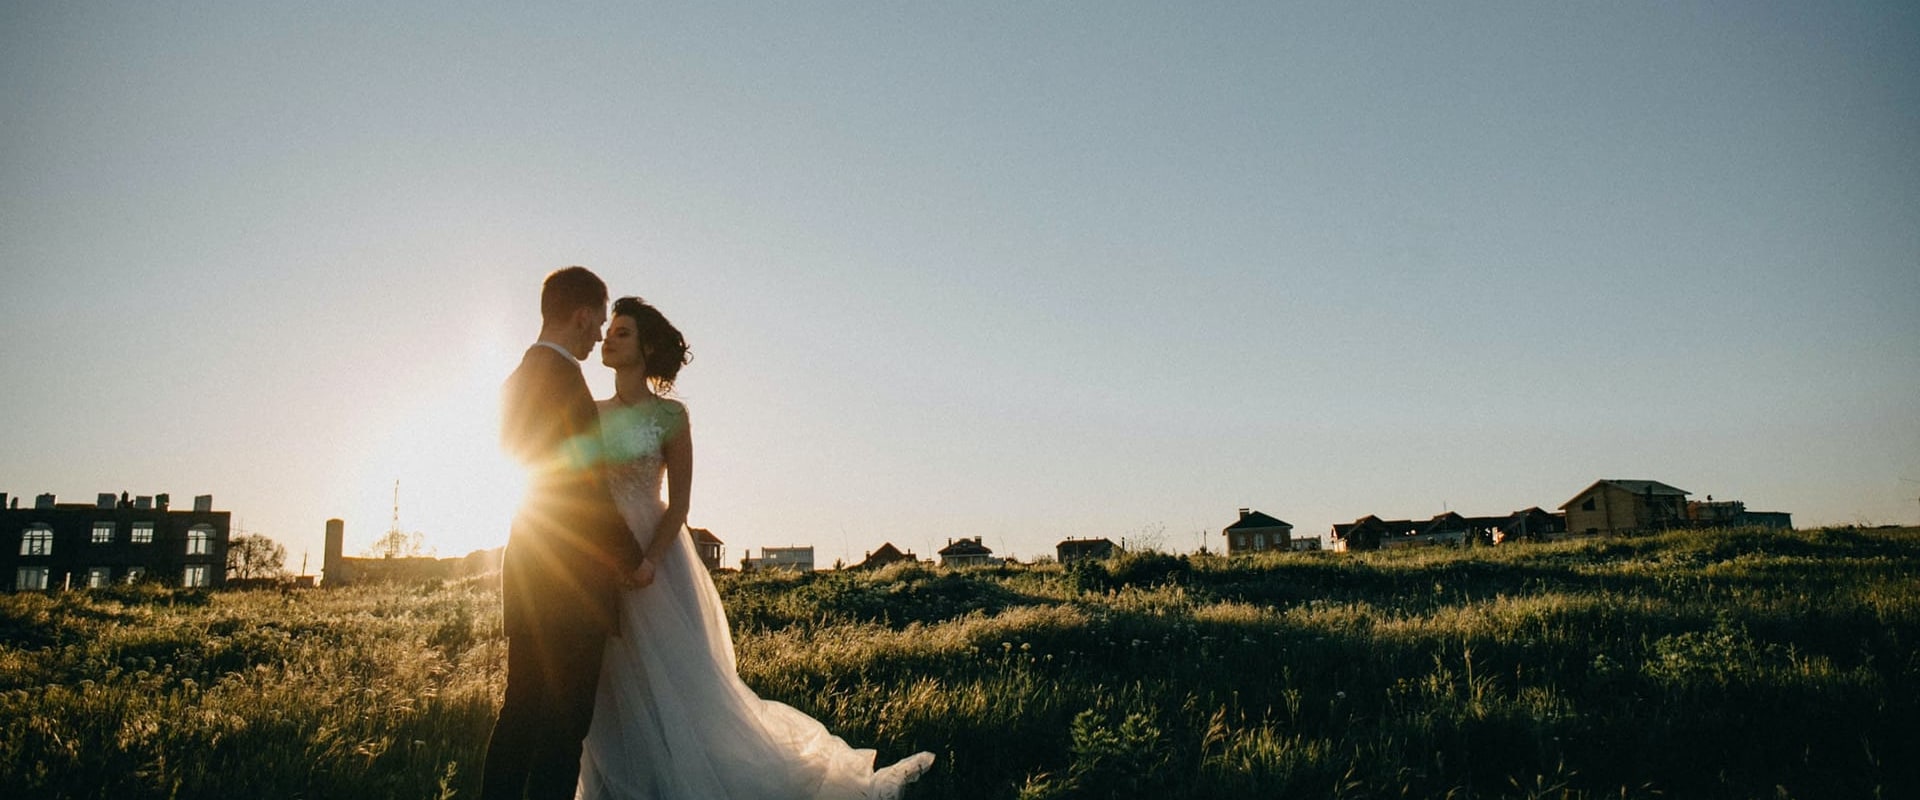 Planning a Wedding in Clark County: Restrictions on Photography and Videography